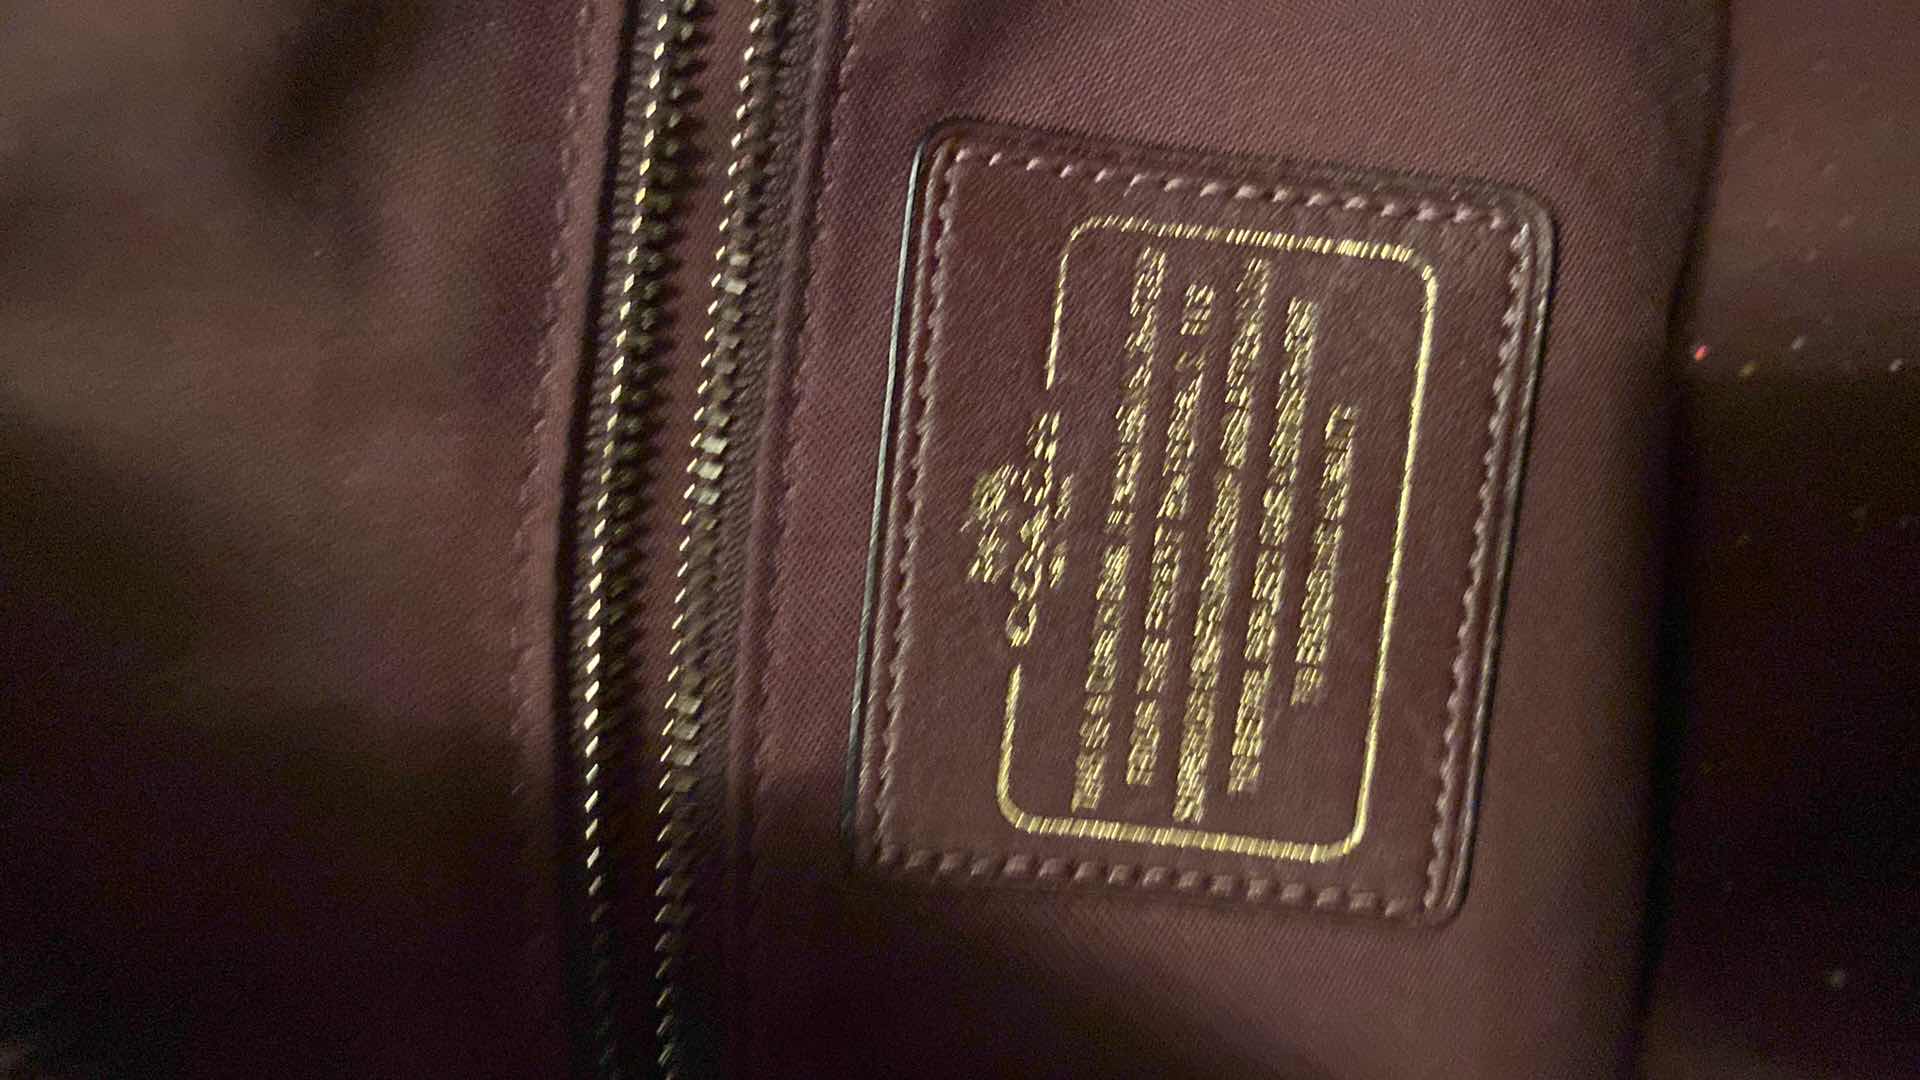 Photo 8 of $869 AUTHENTIC COACH ACE SATCHEL IN BURGUNDY WITH STRAP, WHIPSTITCHED HANDLES AND GUNMETAL HARDWARE INCLUDES DUSTBAG- NON RETURABLE - FINAL SALE